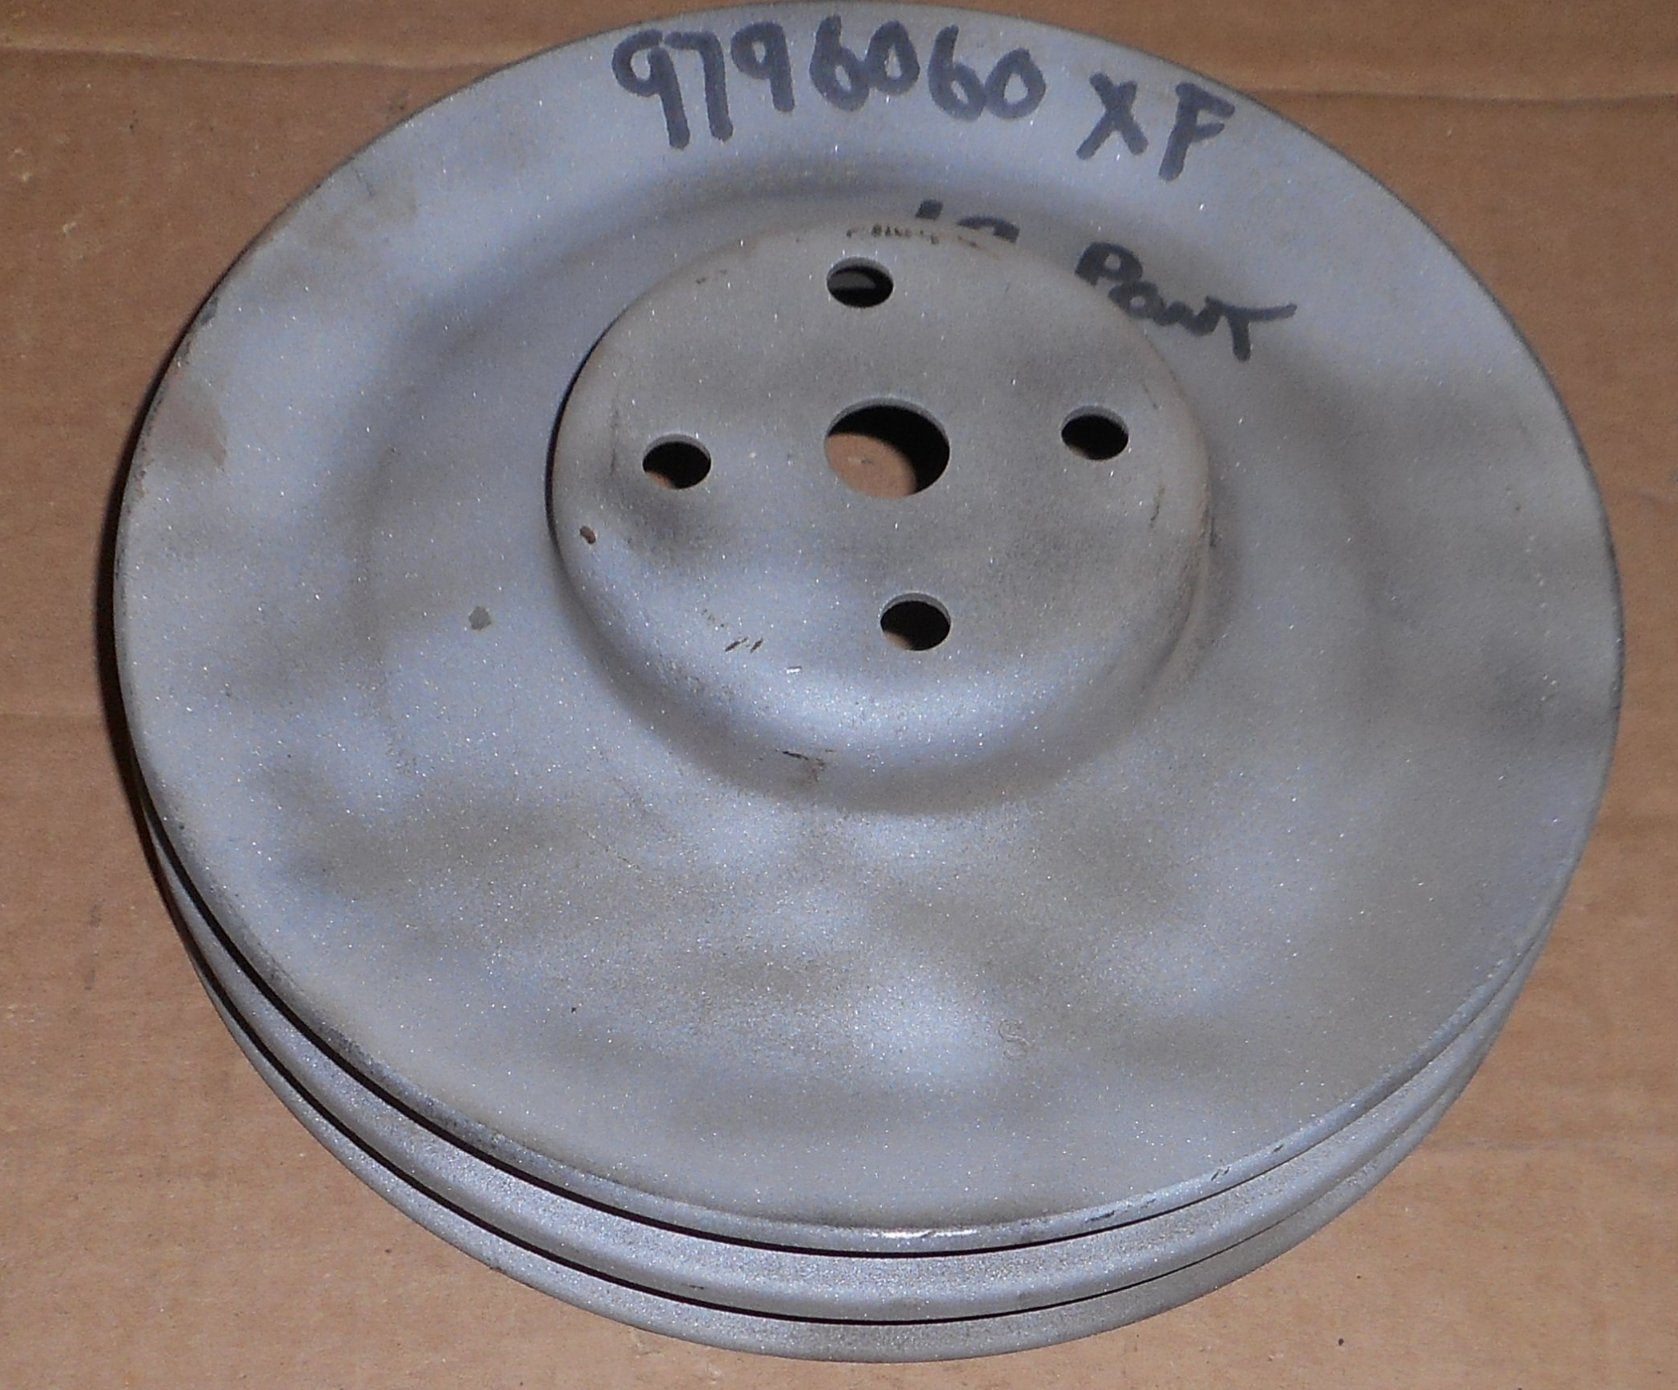 FAN PULLEY, V8 2 GROOVE, 060, USED, 69 PONTIAC